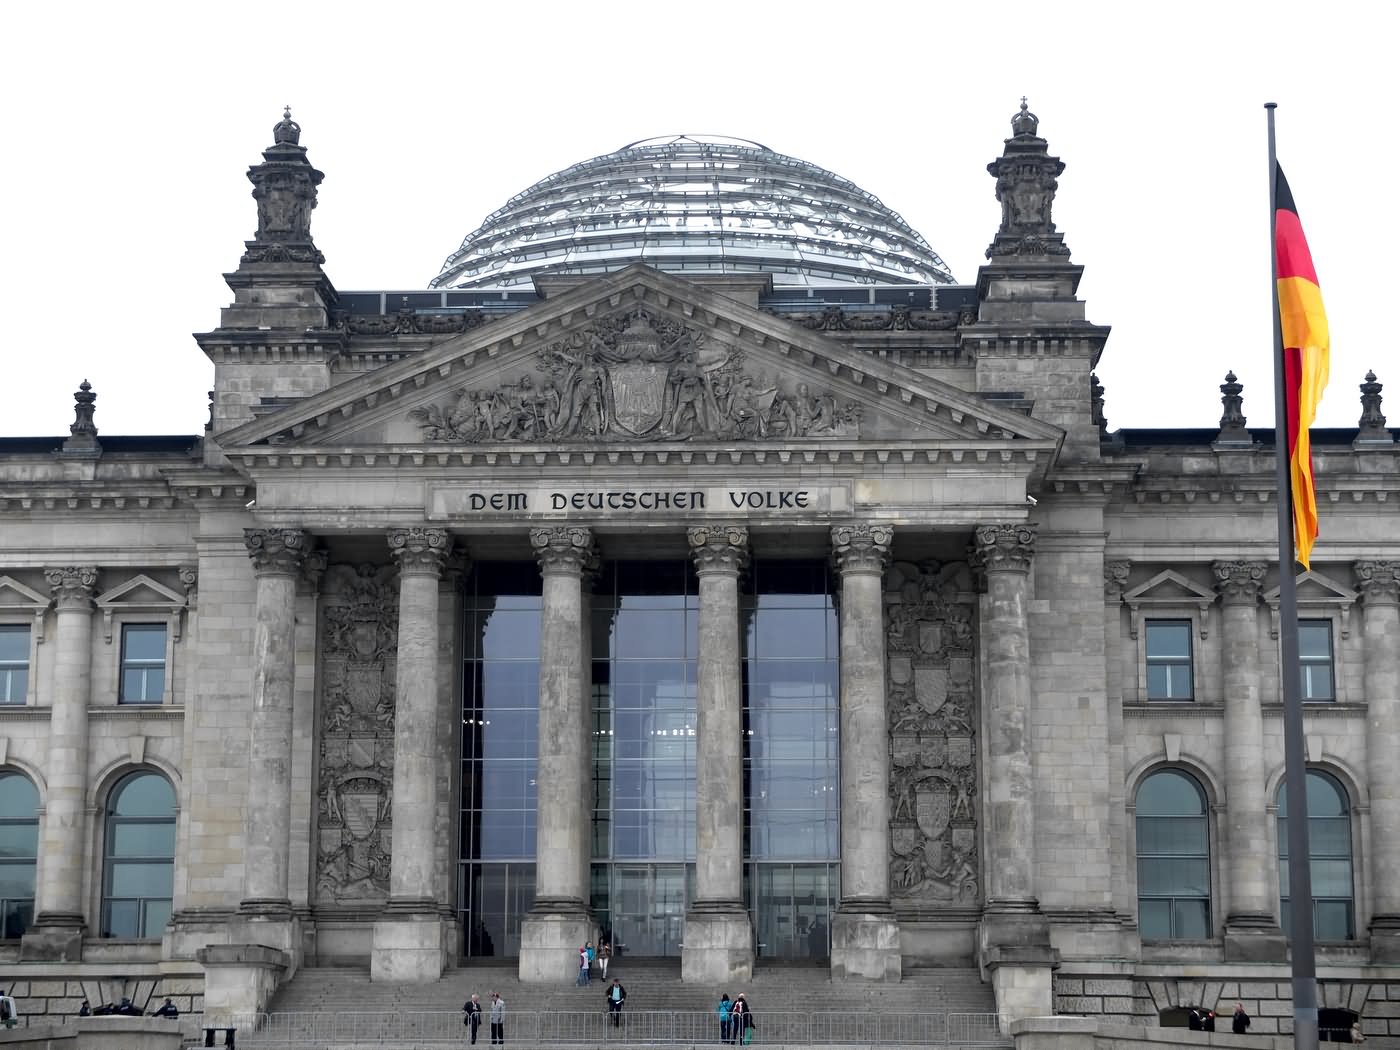 The Reichstag Building And Dome In Berlin